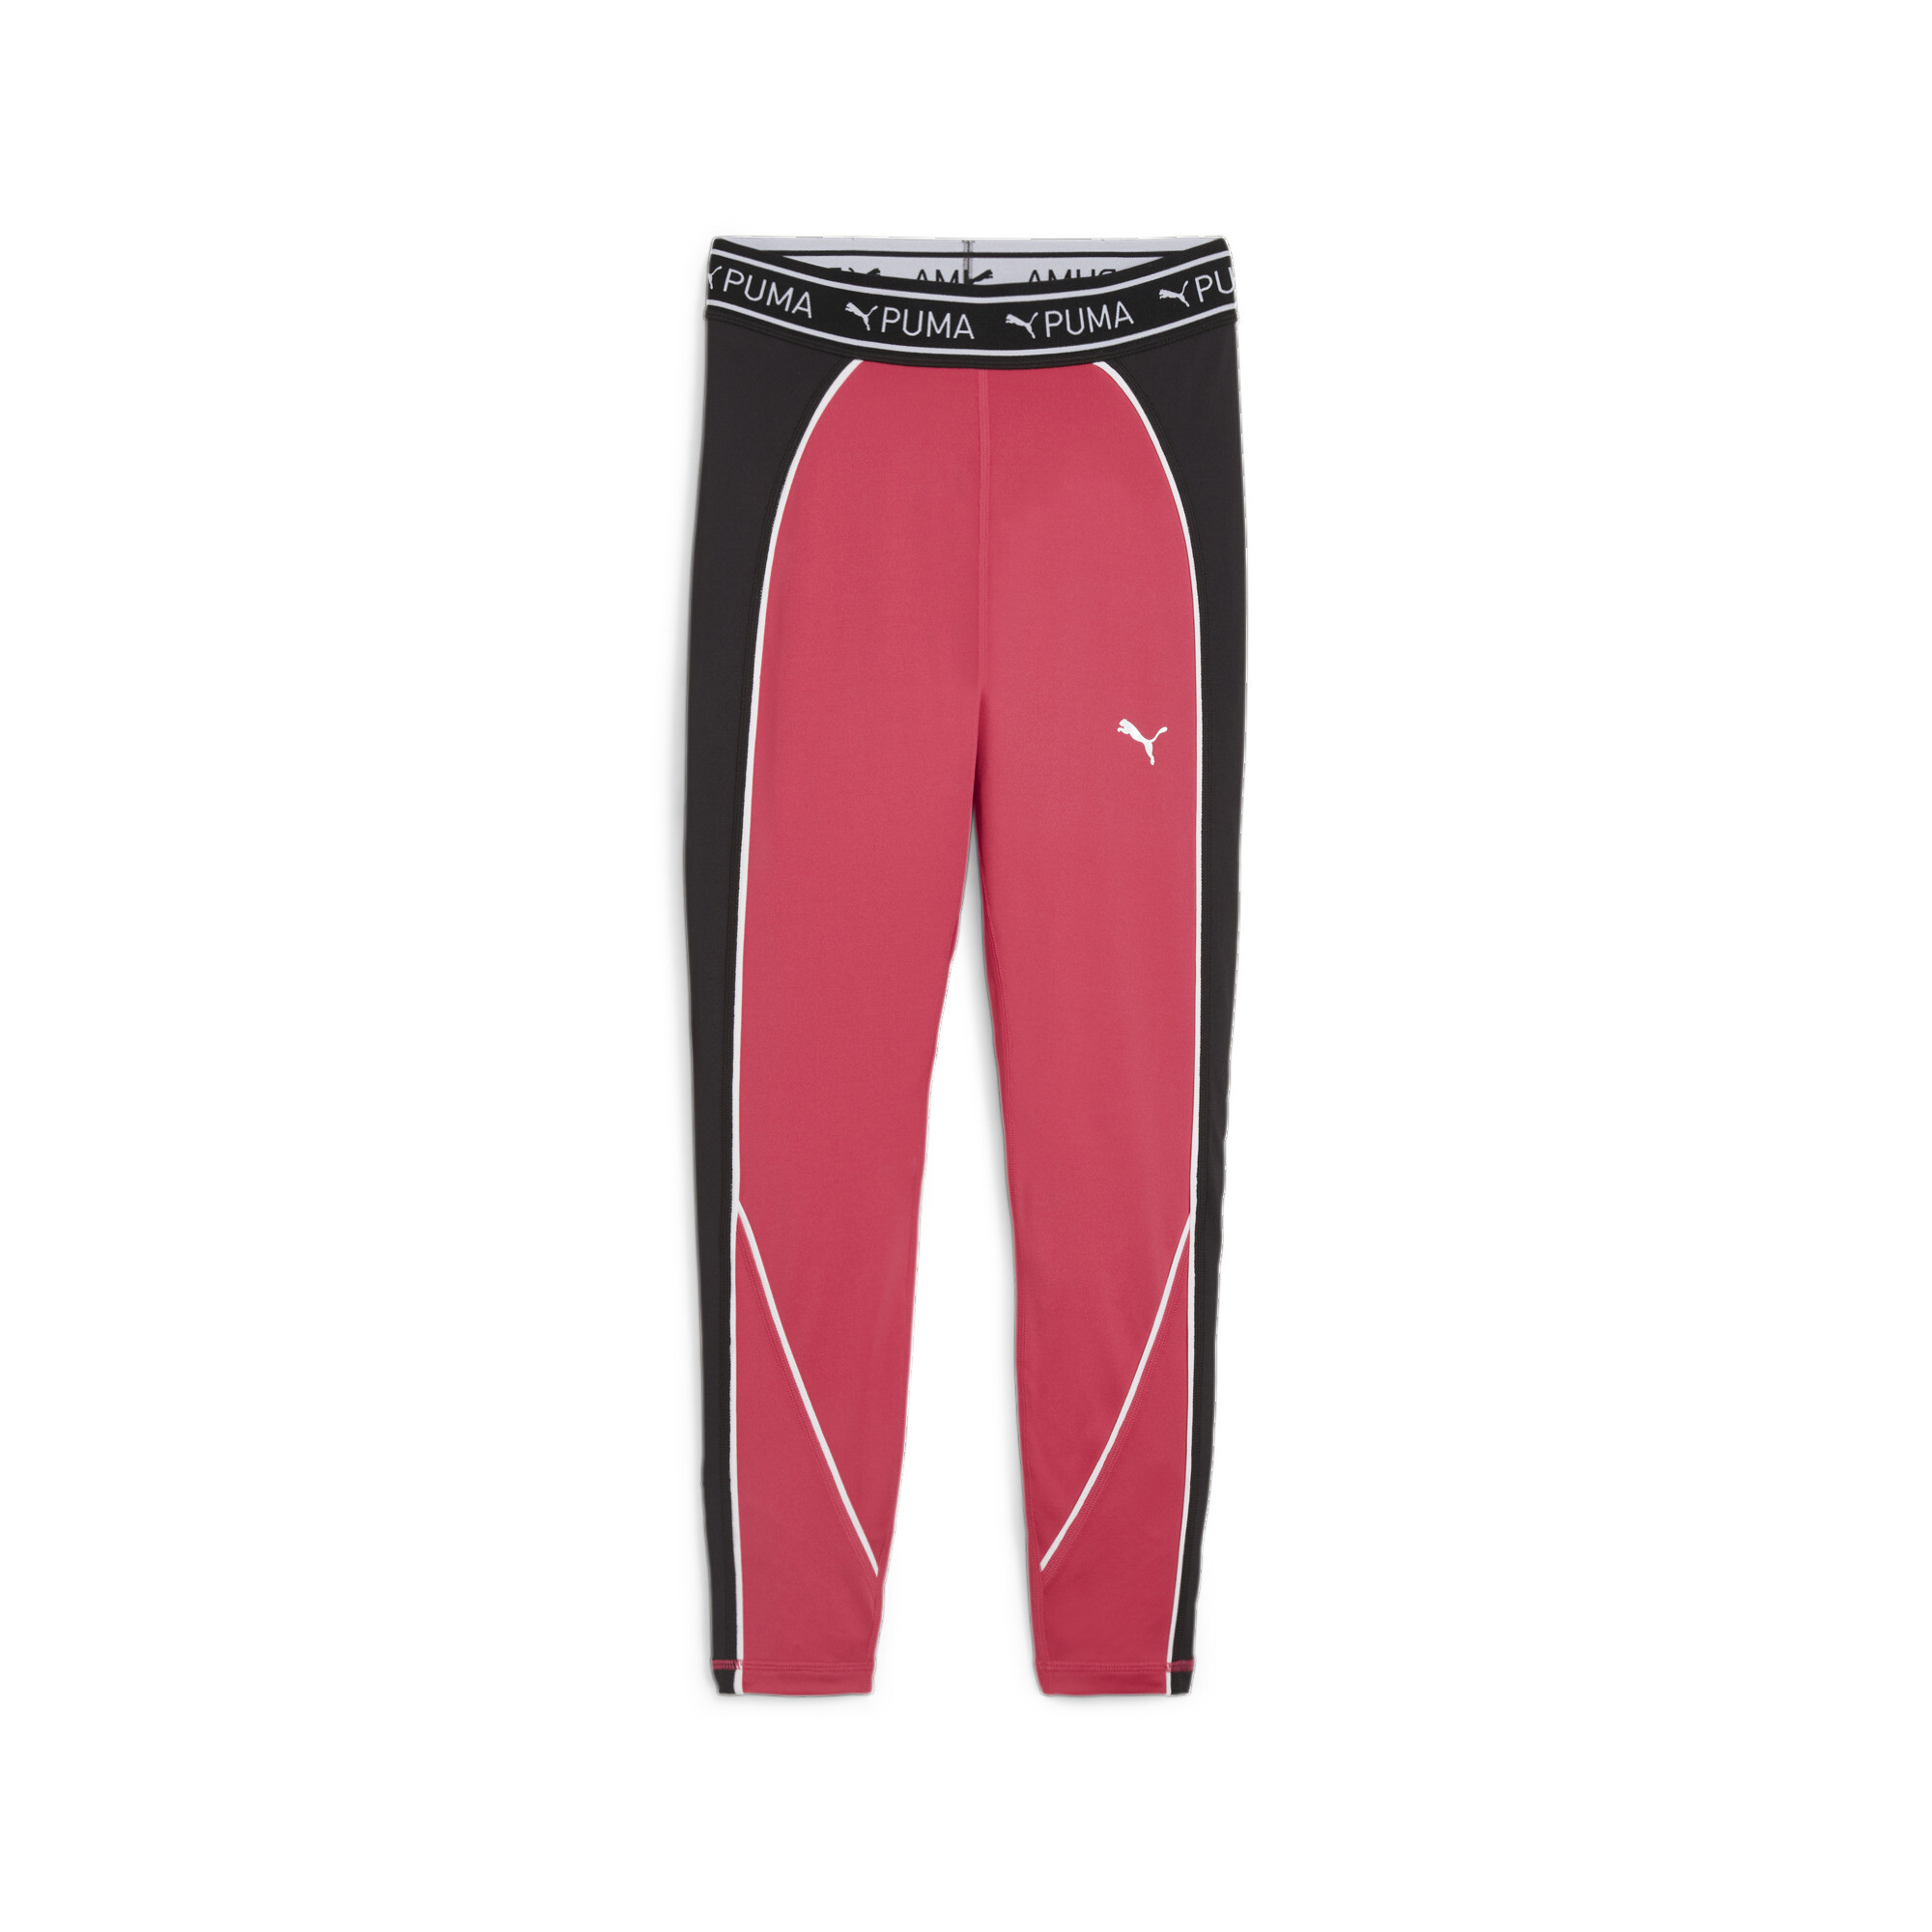 Women's Puma FIT 7/8's Training Tights, Pink, Size 3XL, Clothing